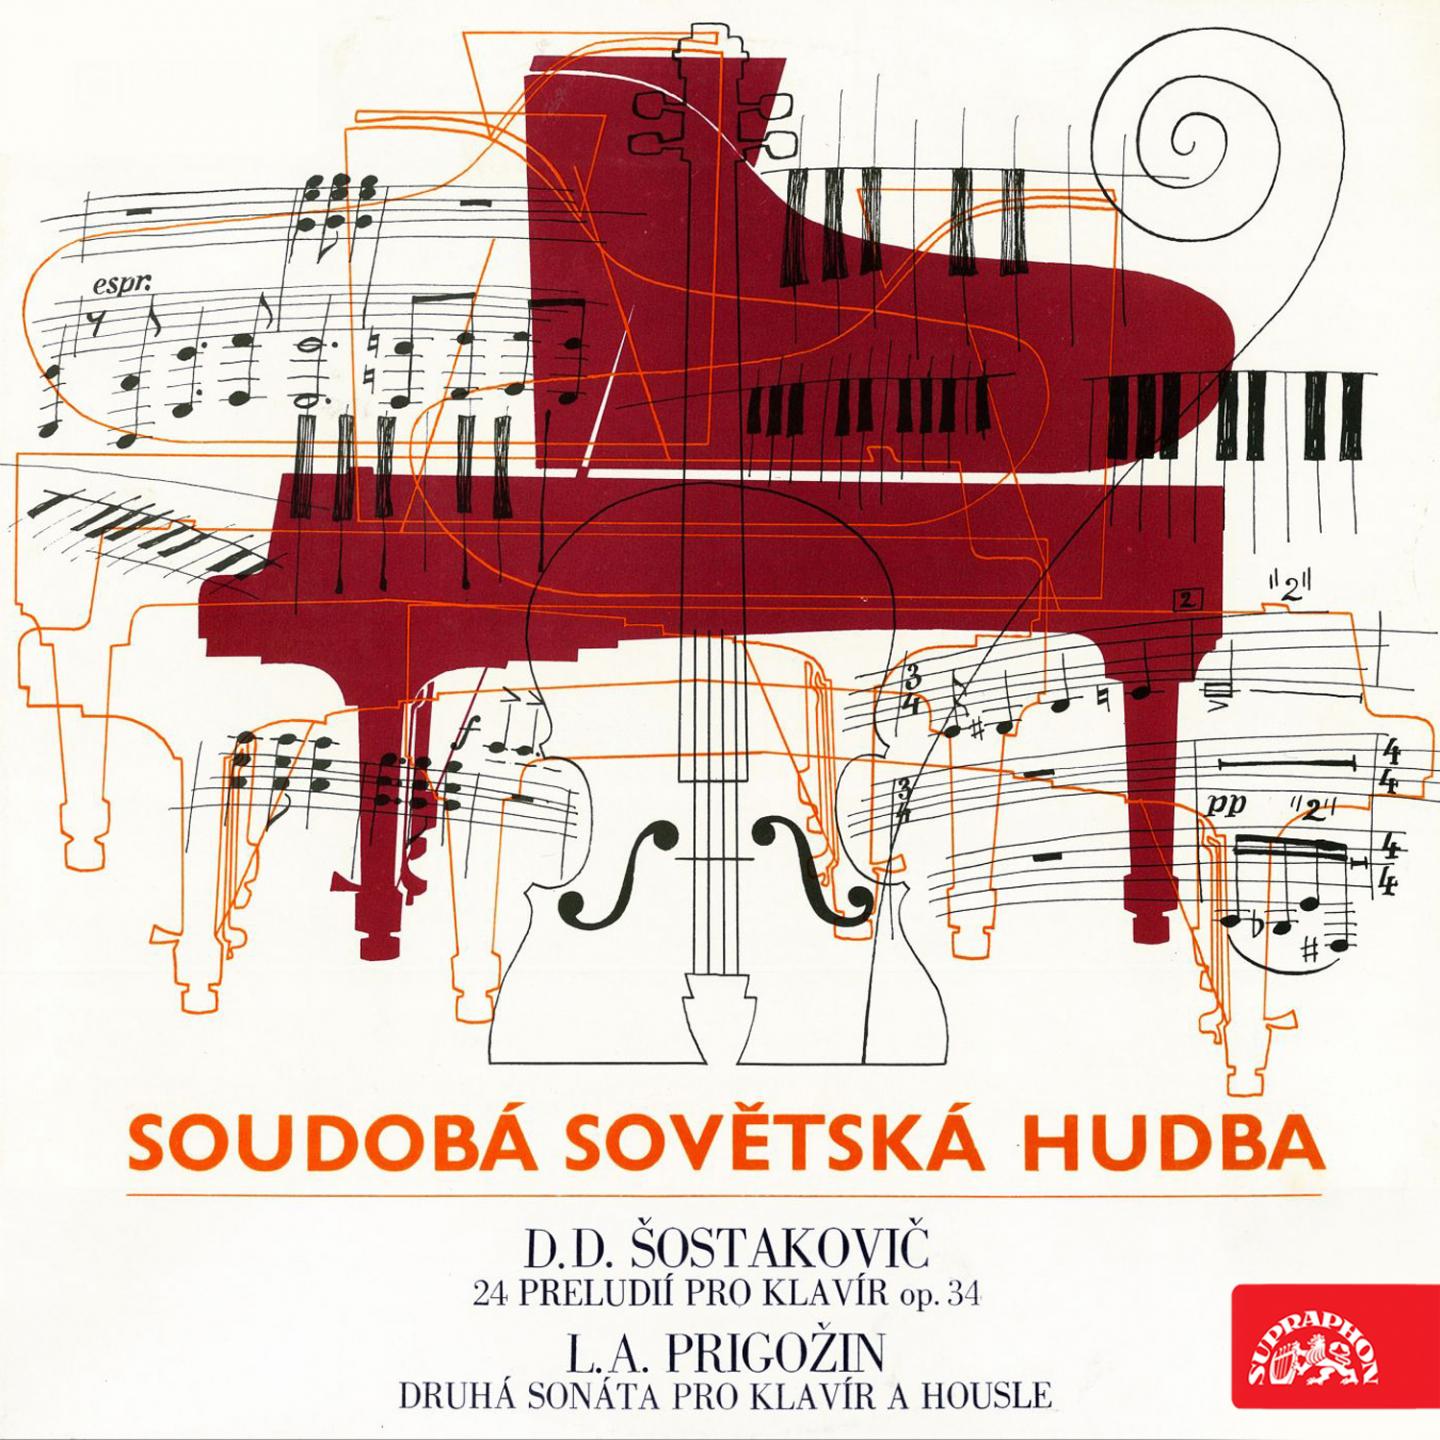 24 Pre ludes for Piano, Op. 34: No. 24